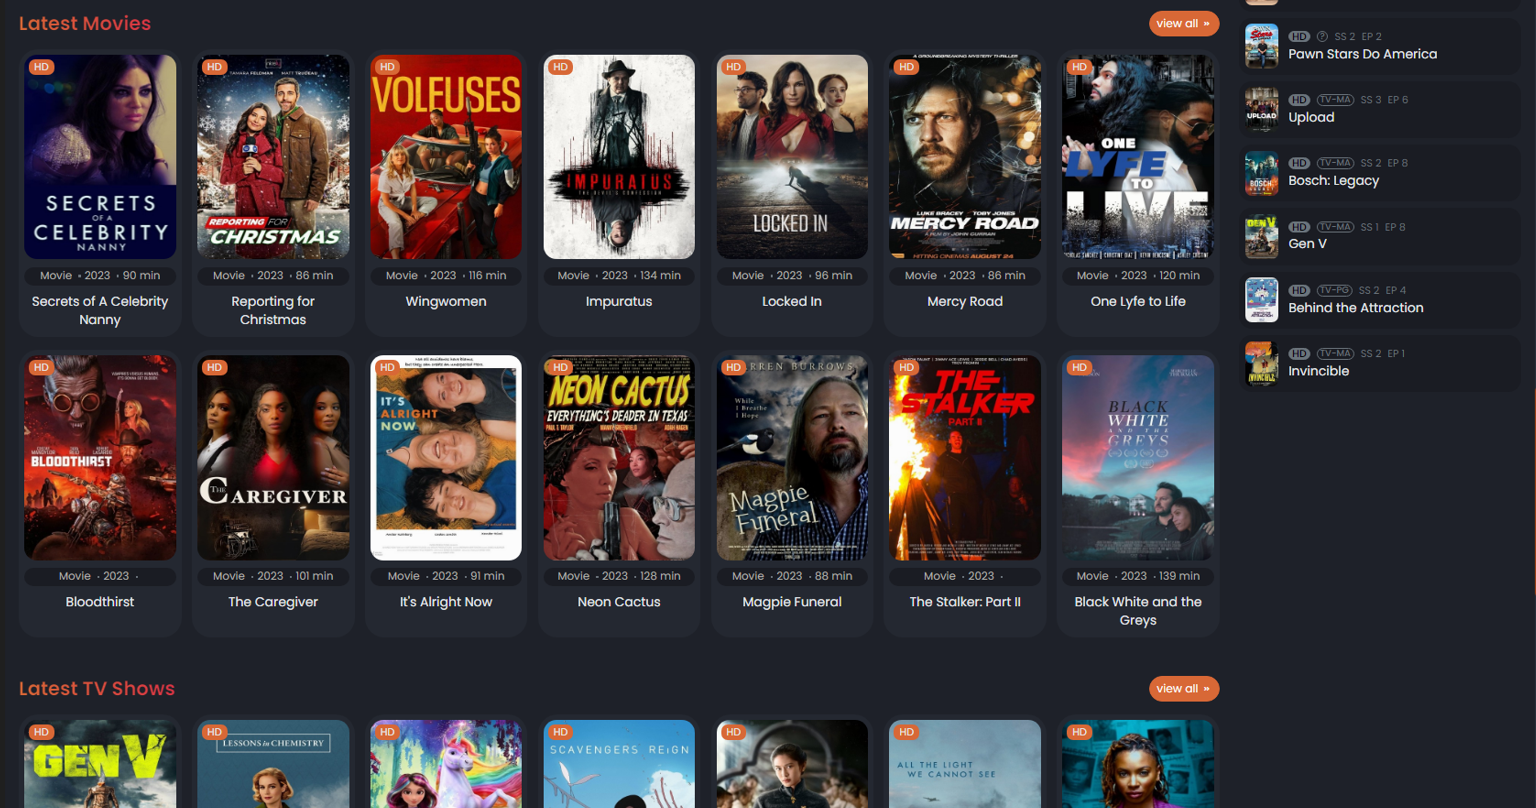 Homepage of watchseries showing latest movies